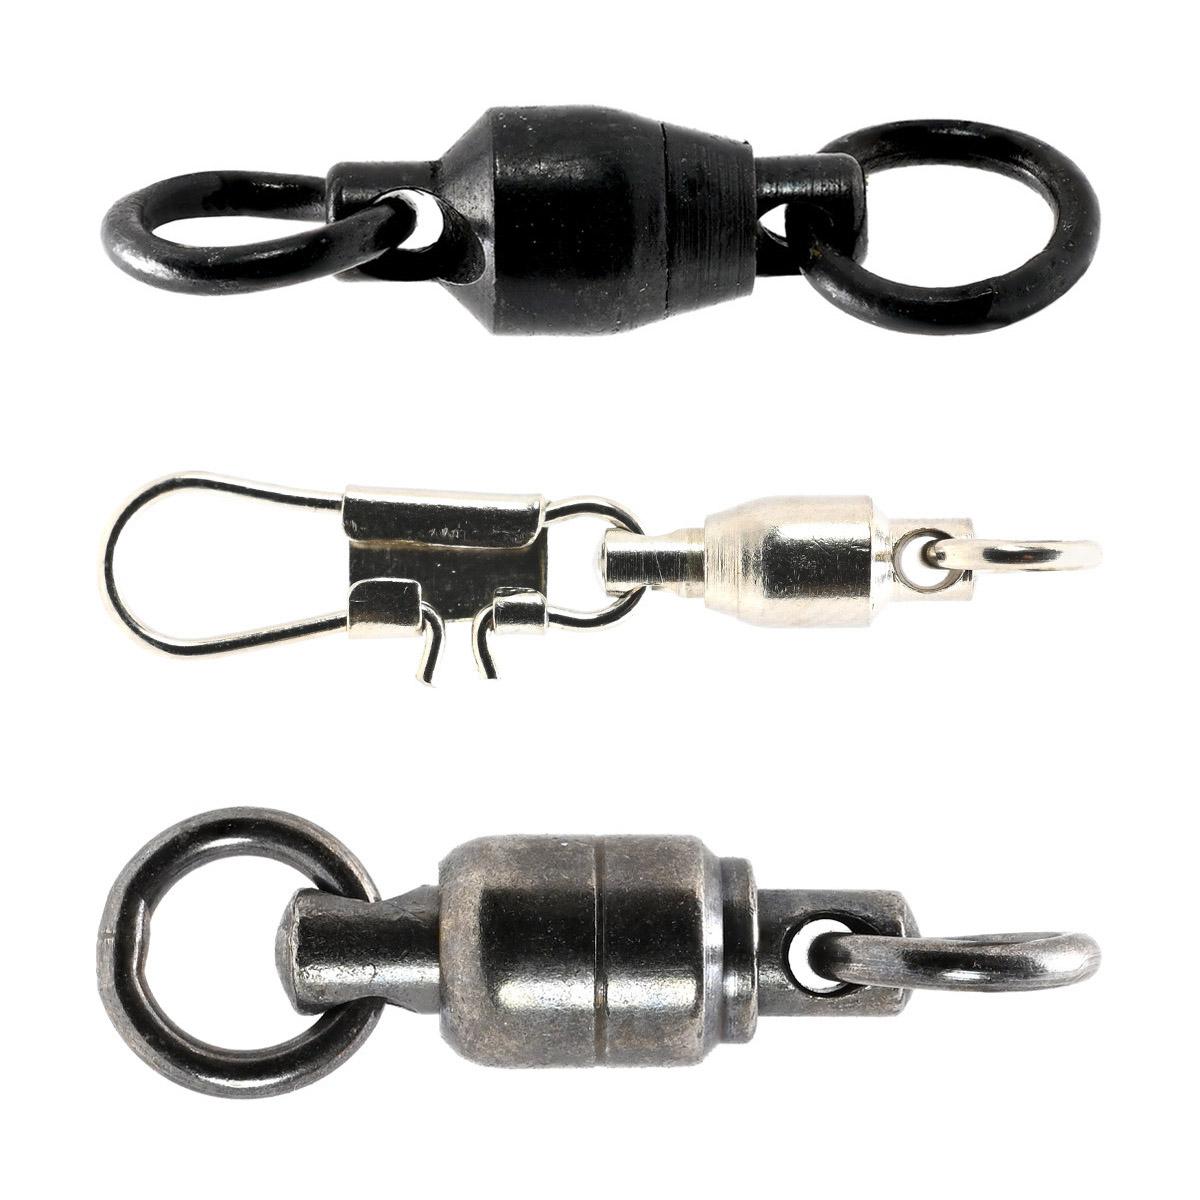 Beads & Clips Complete Range Available Korum Terminal Tackle Swivels 